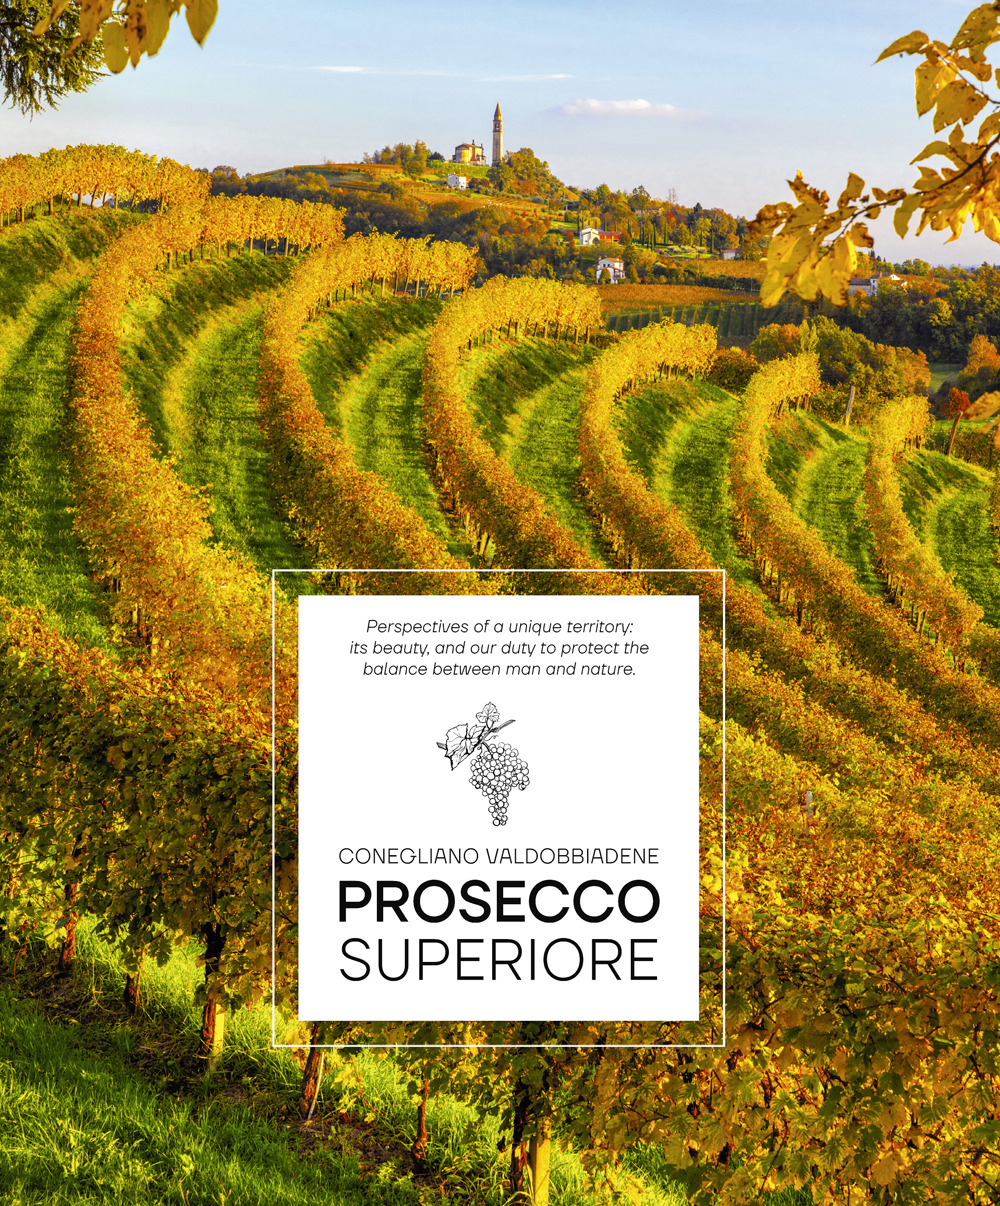 Prosecco Superiore. Perspectives of a unique territory: its beauty, and our duty to protect the balance between man and nature